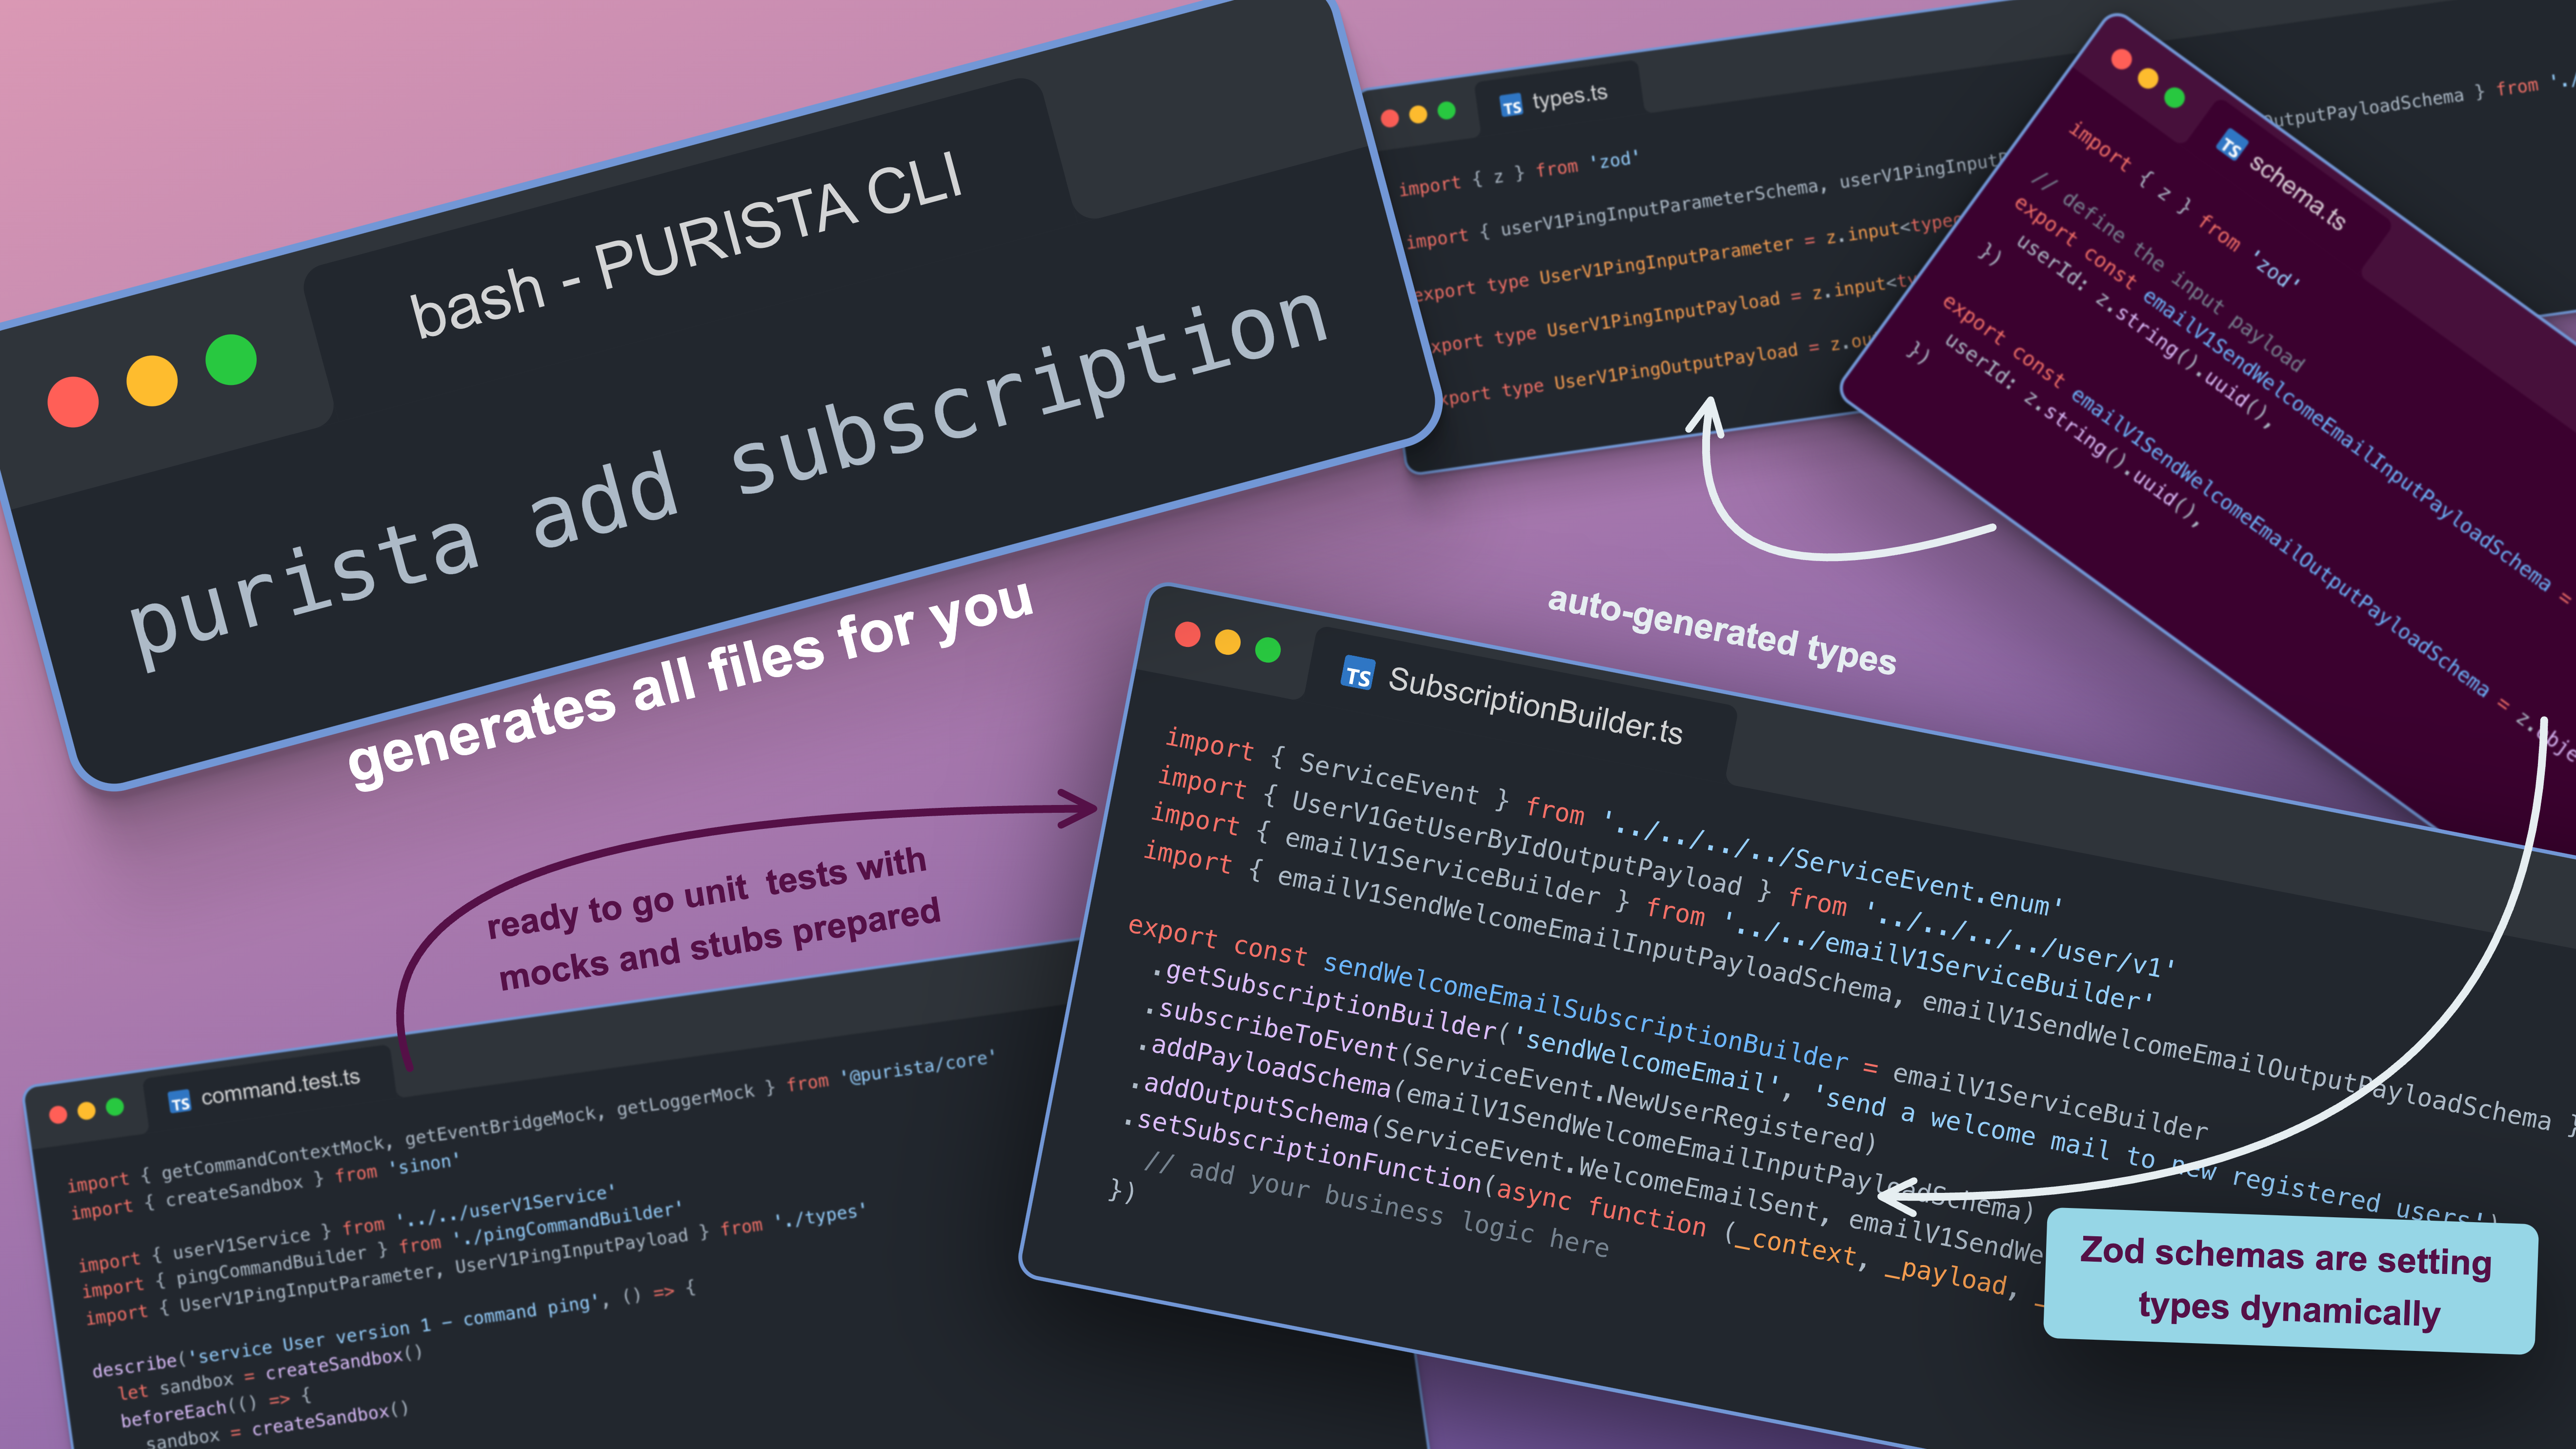 Add subscription with cli